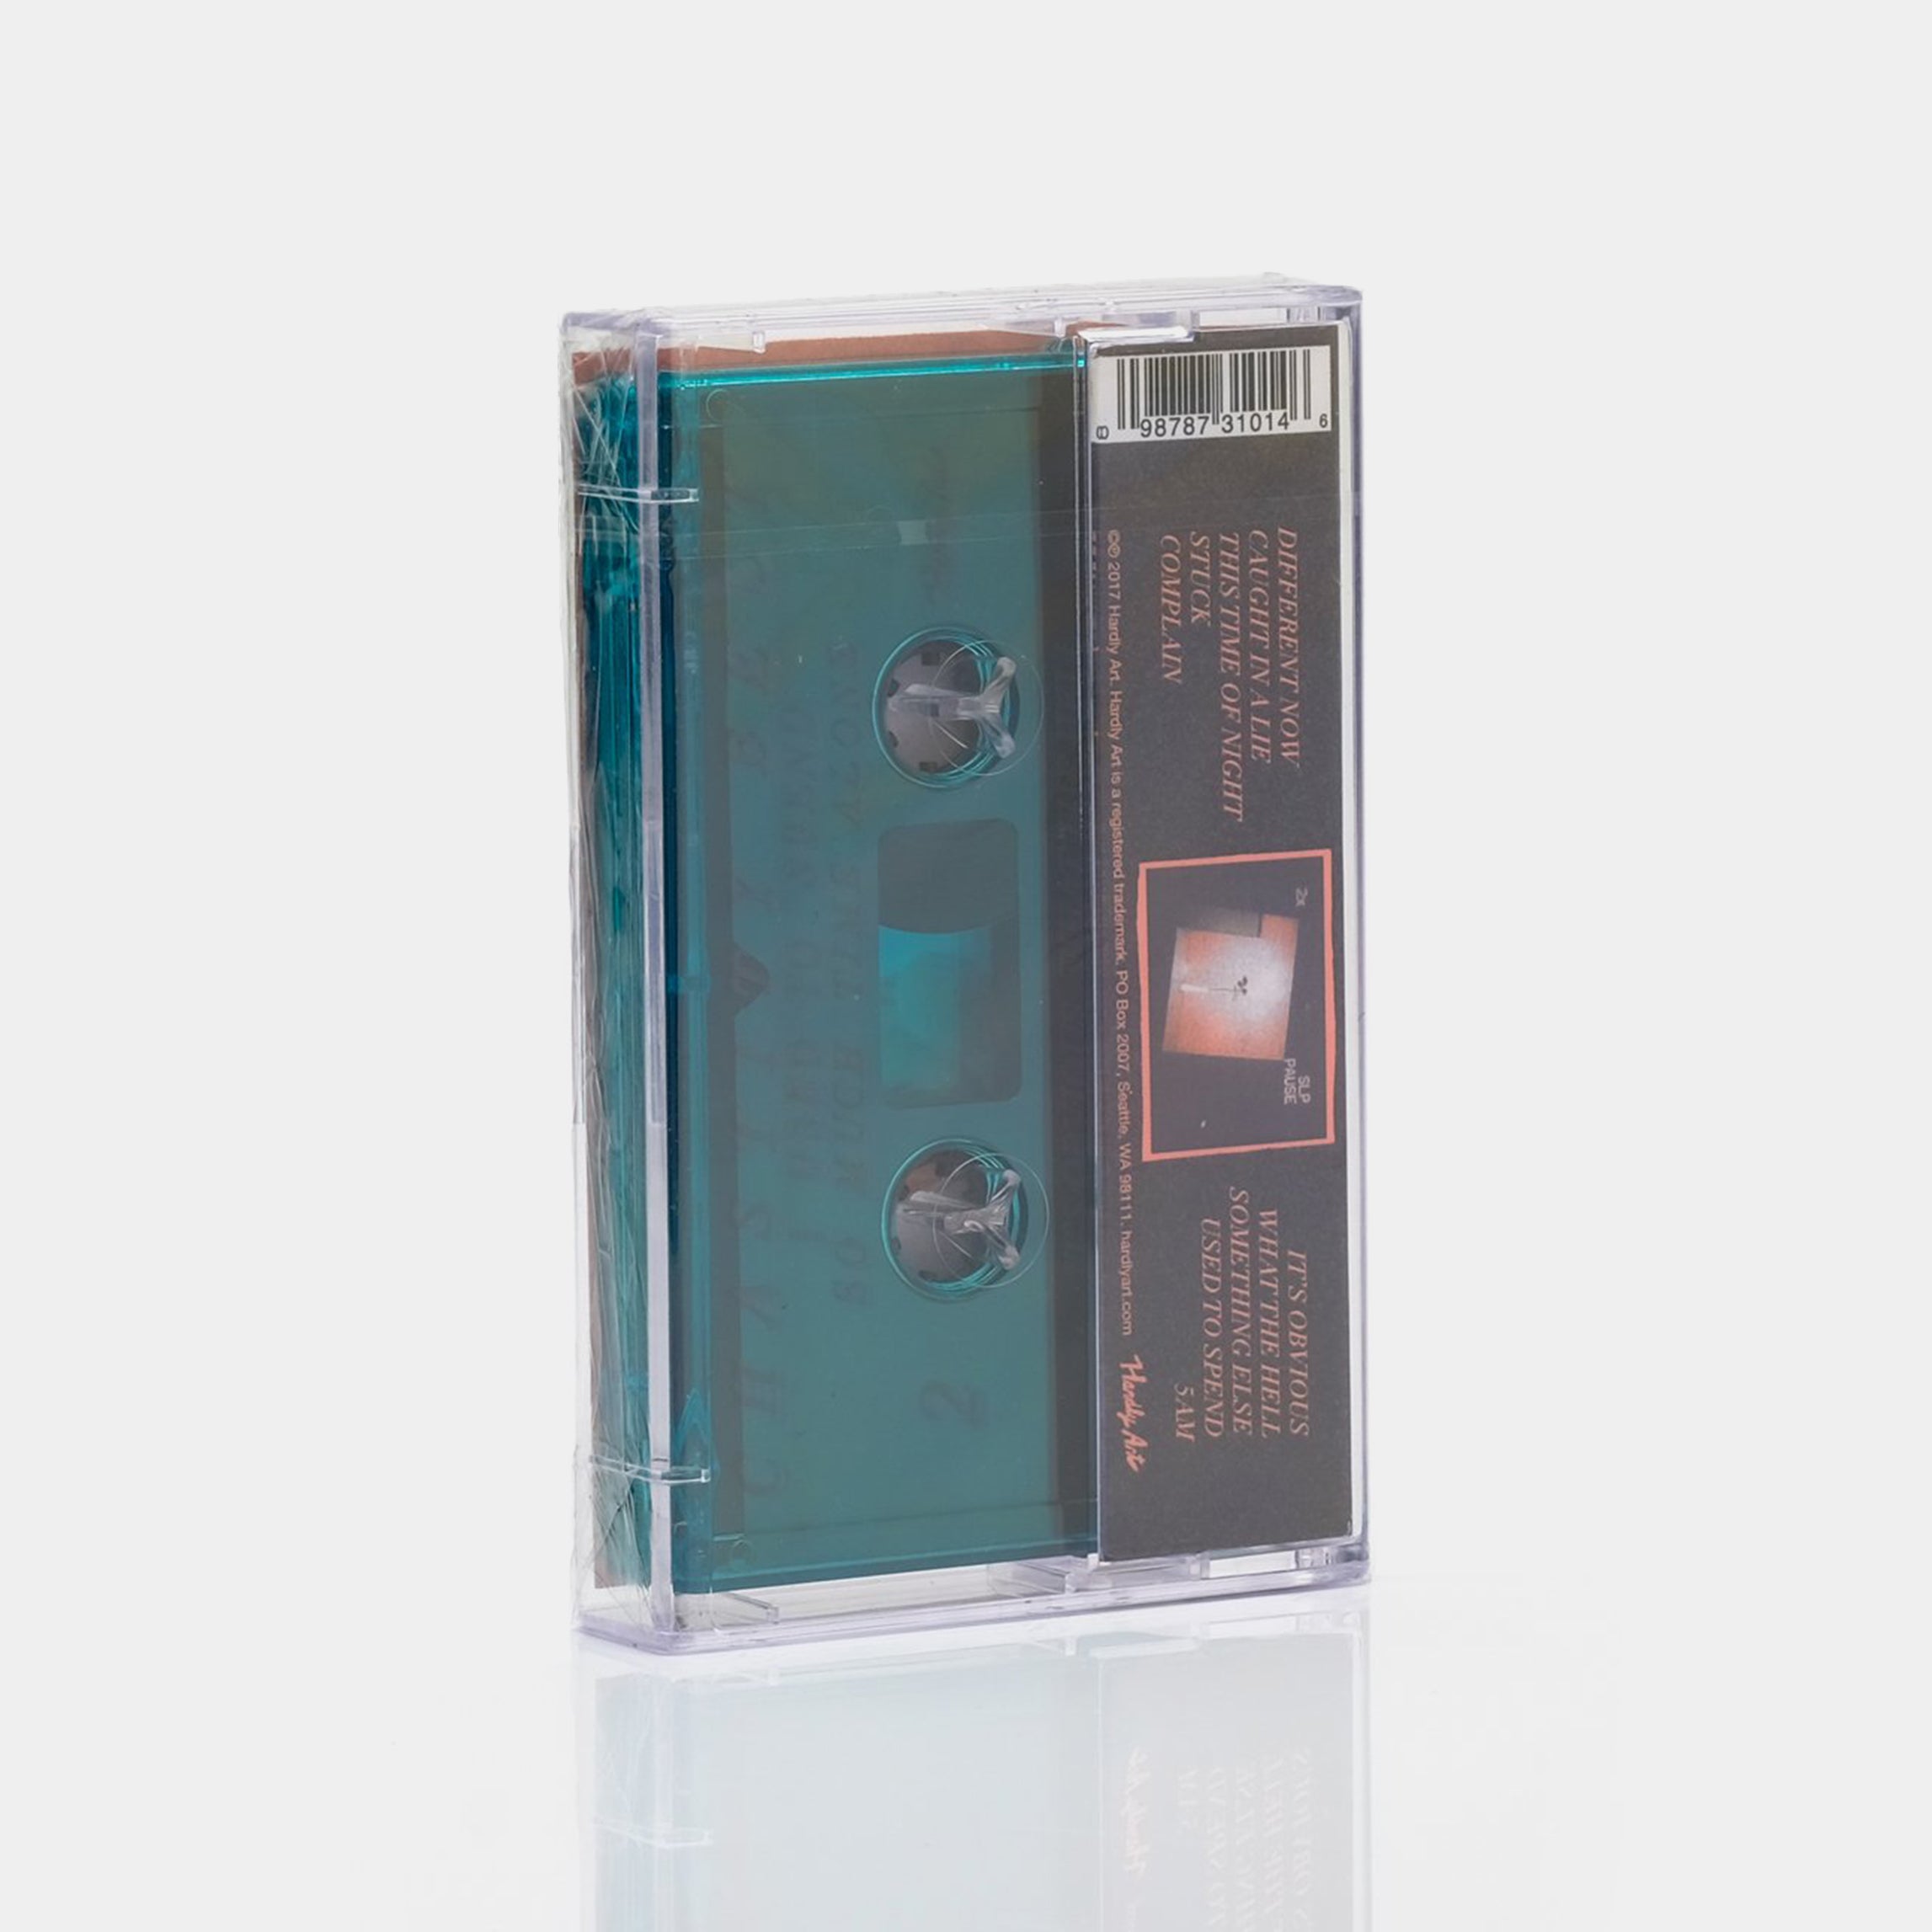 Chastity Belt - I Used To Spend So Much Time Alone Cassette Tape